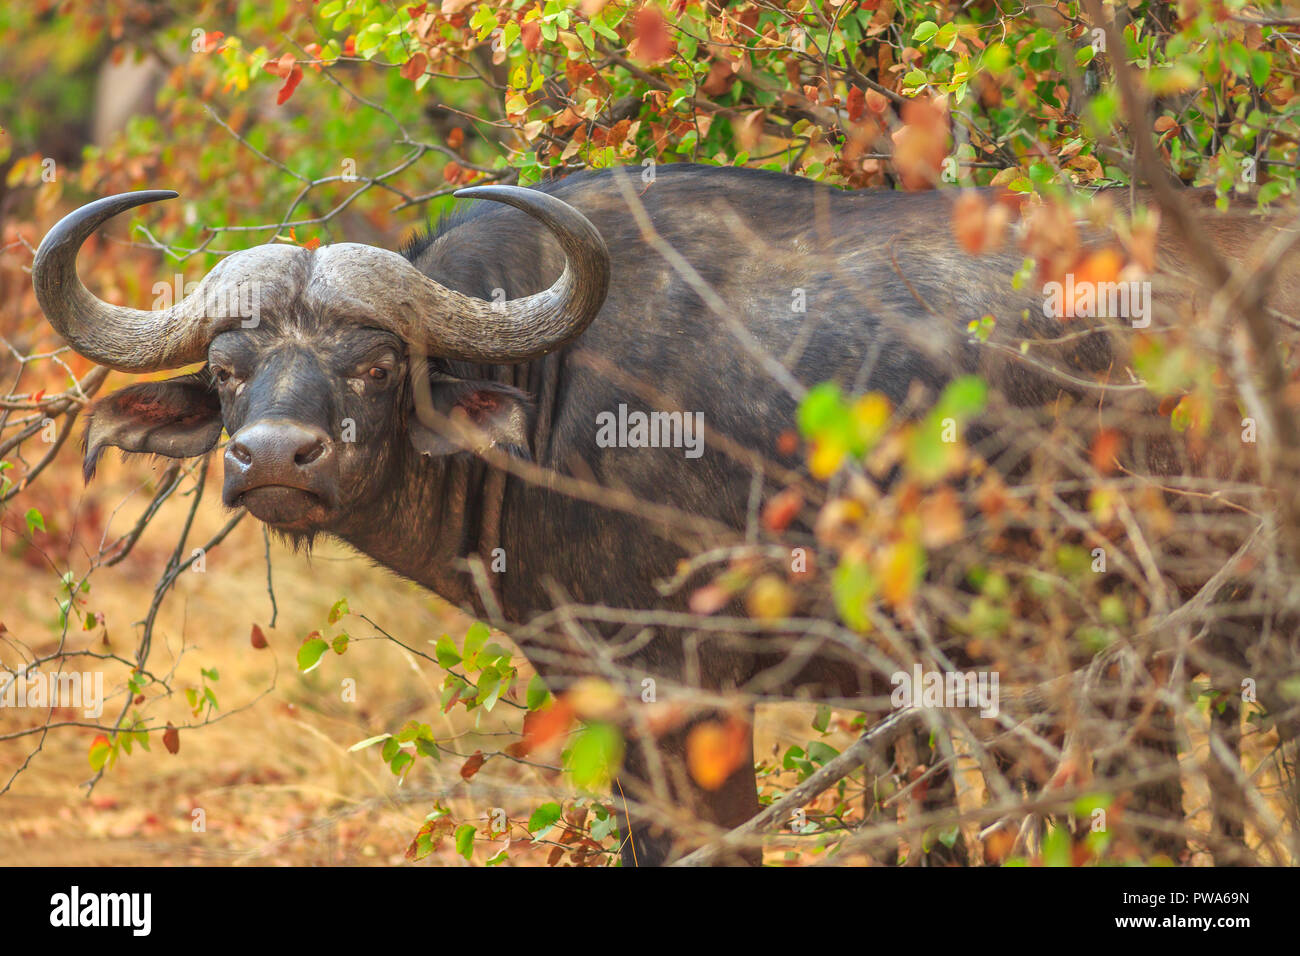 Closeup of African buffalo, Syncerus caffer, in habitat nature, dry season. Kruger National Park in South Africa. The Cape buffalo is a large African bovine part of popular Big Five. Stock Photo